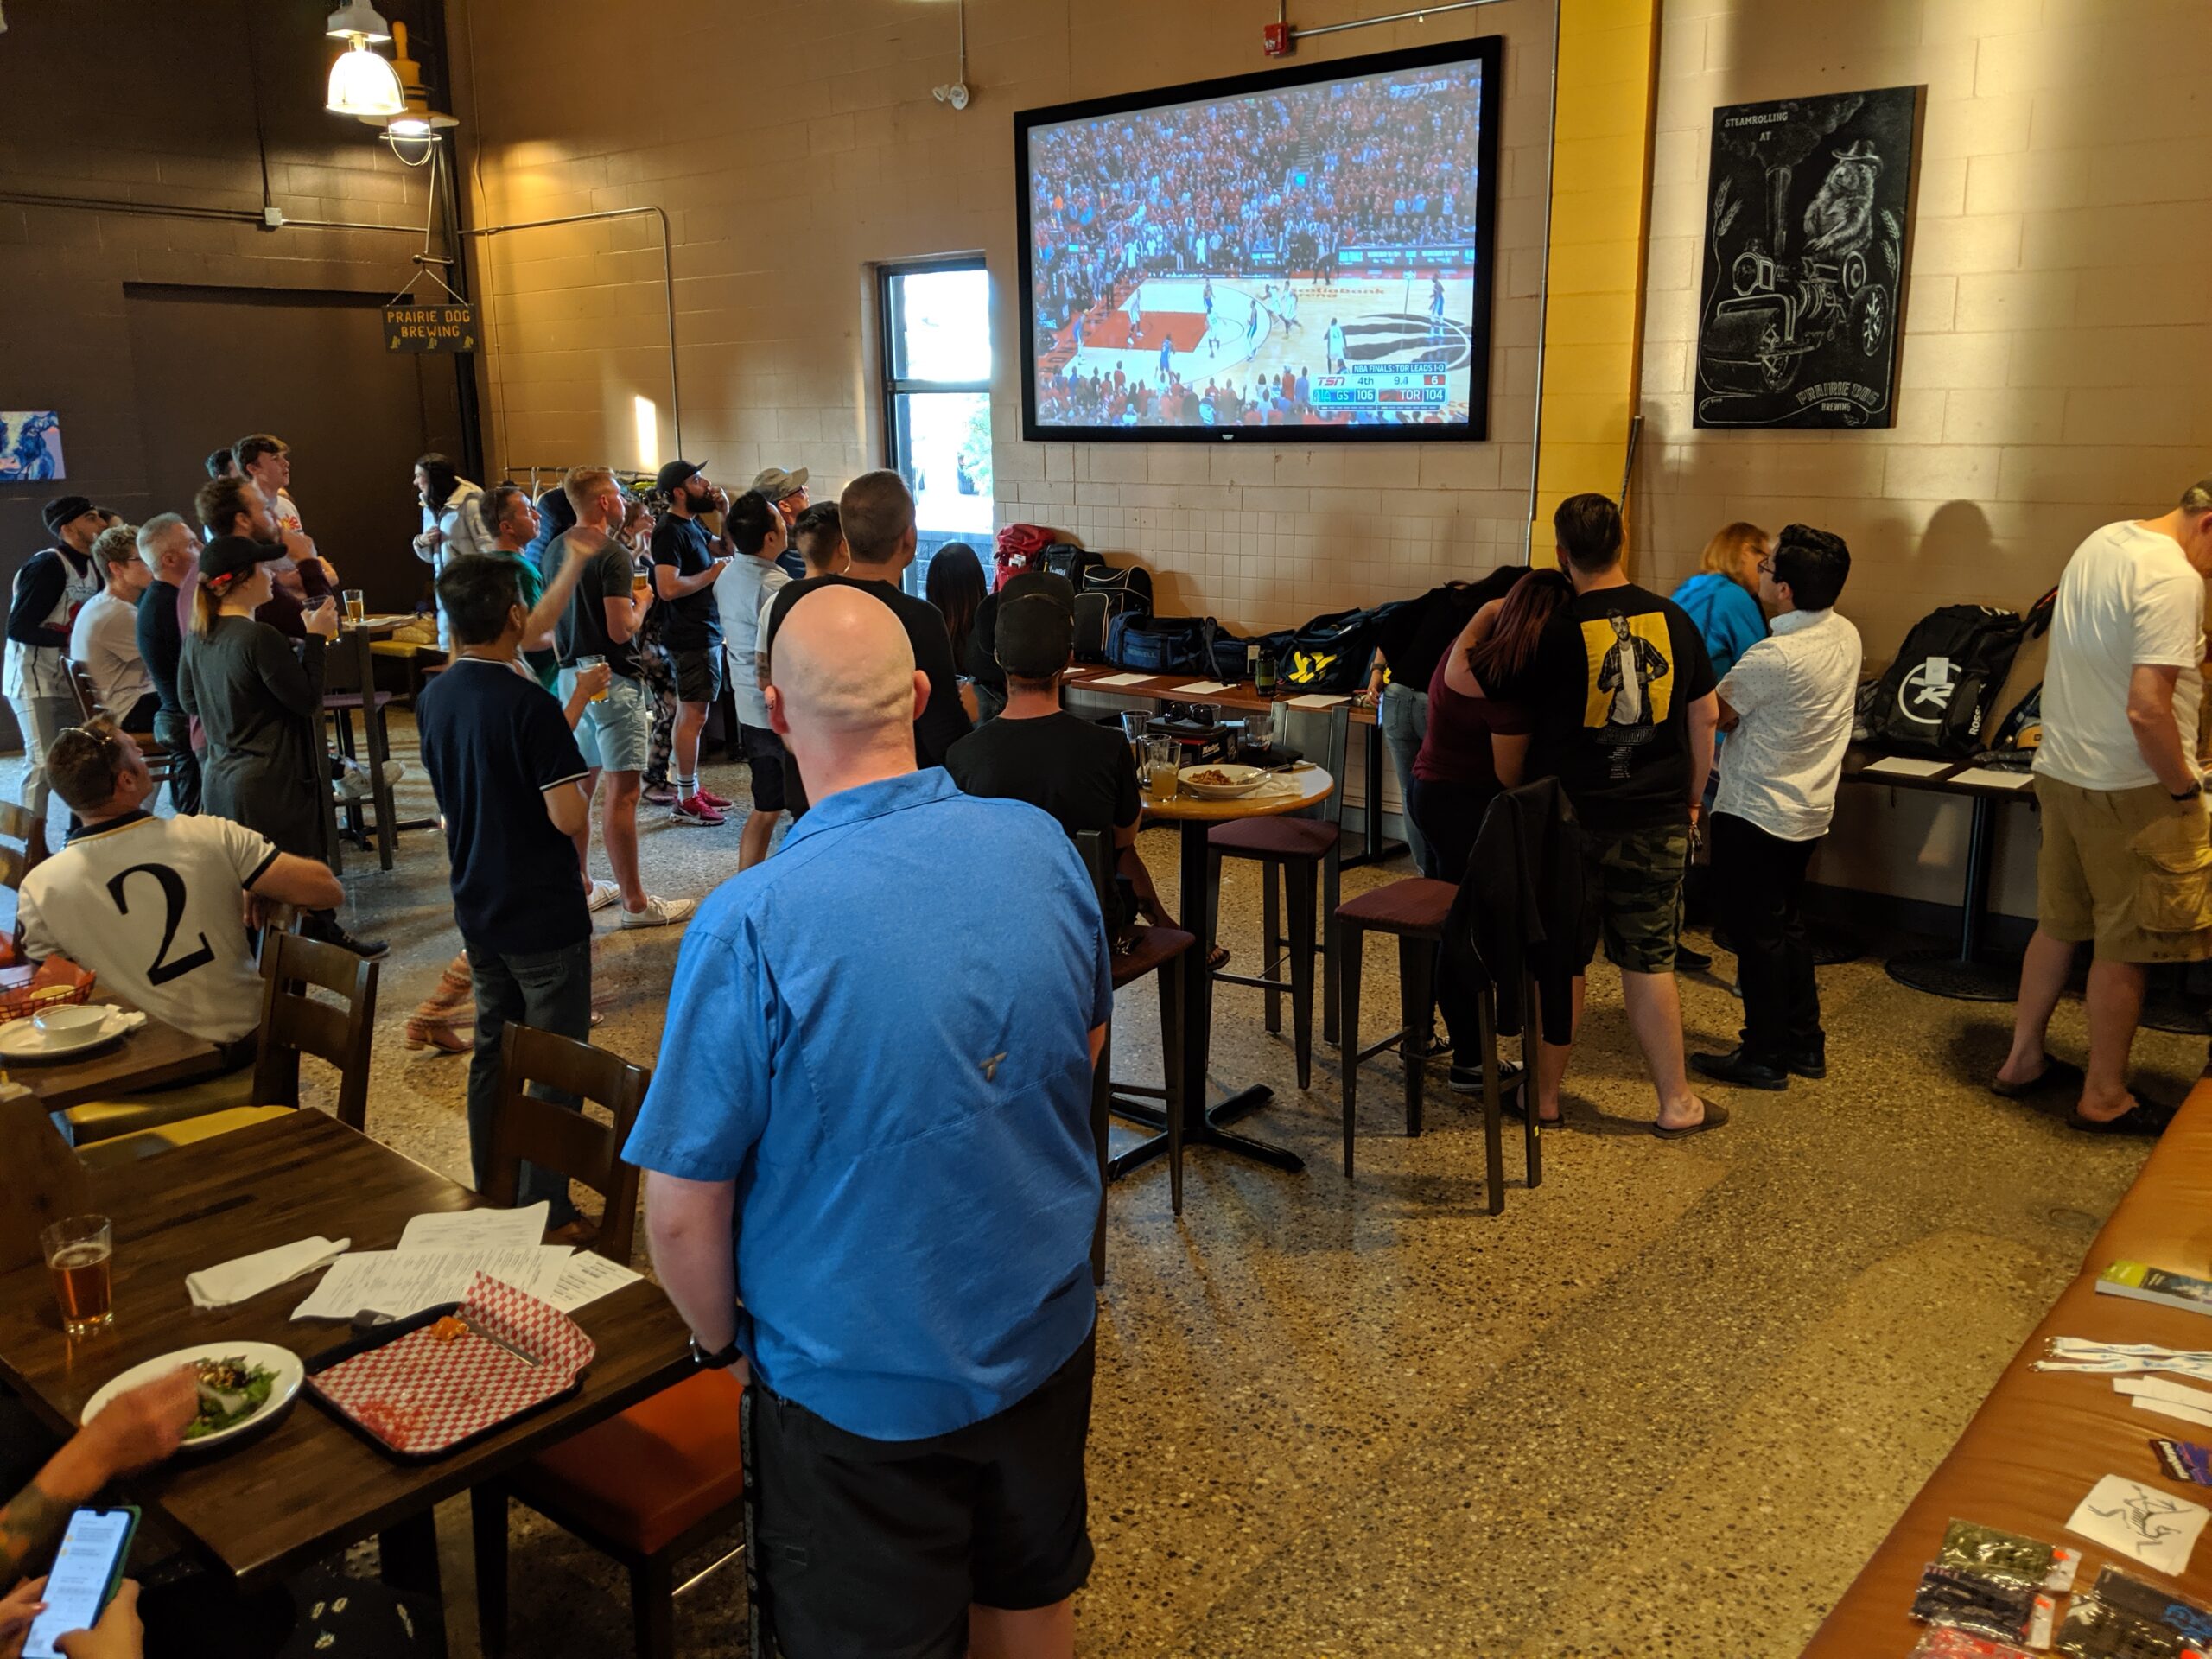 Event guests stand to watch an NBA game on Prairie Dog Brewing's 120" big screen projector.